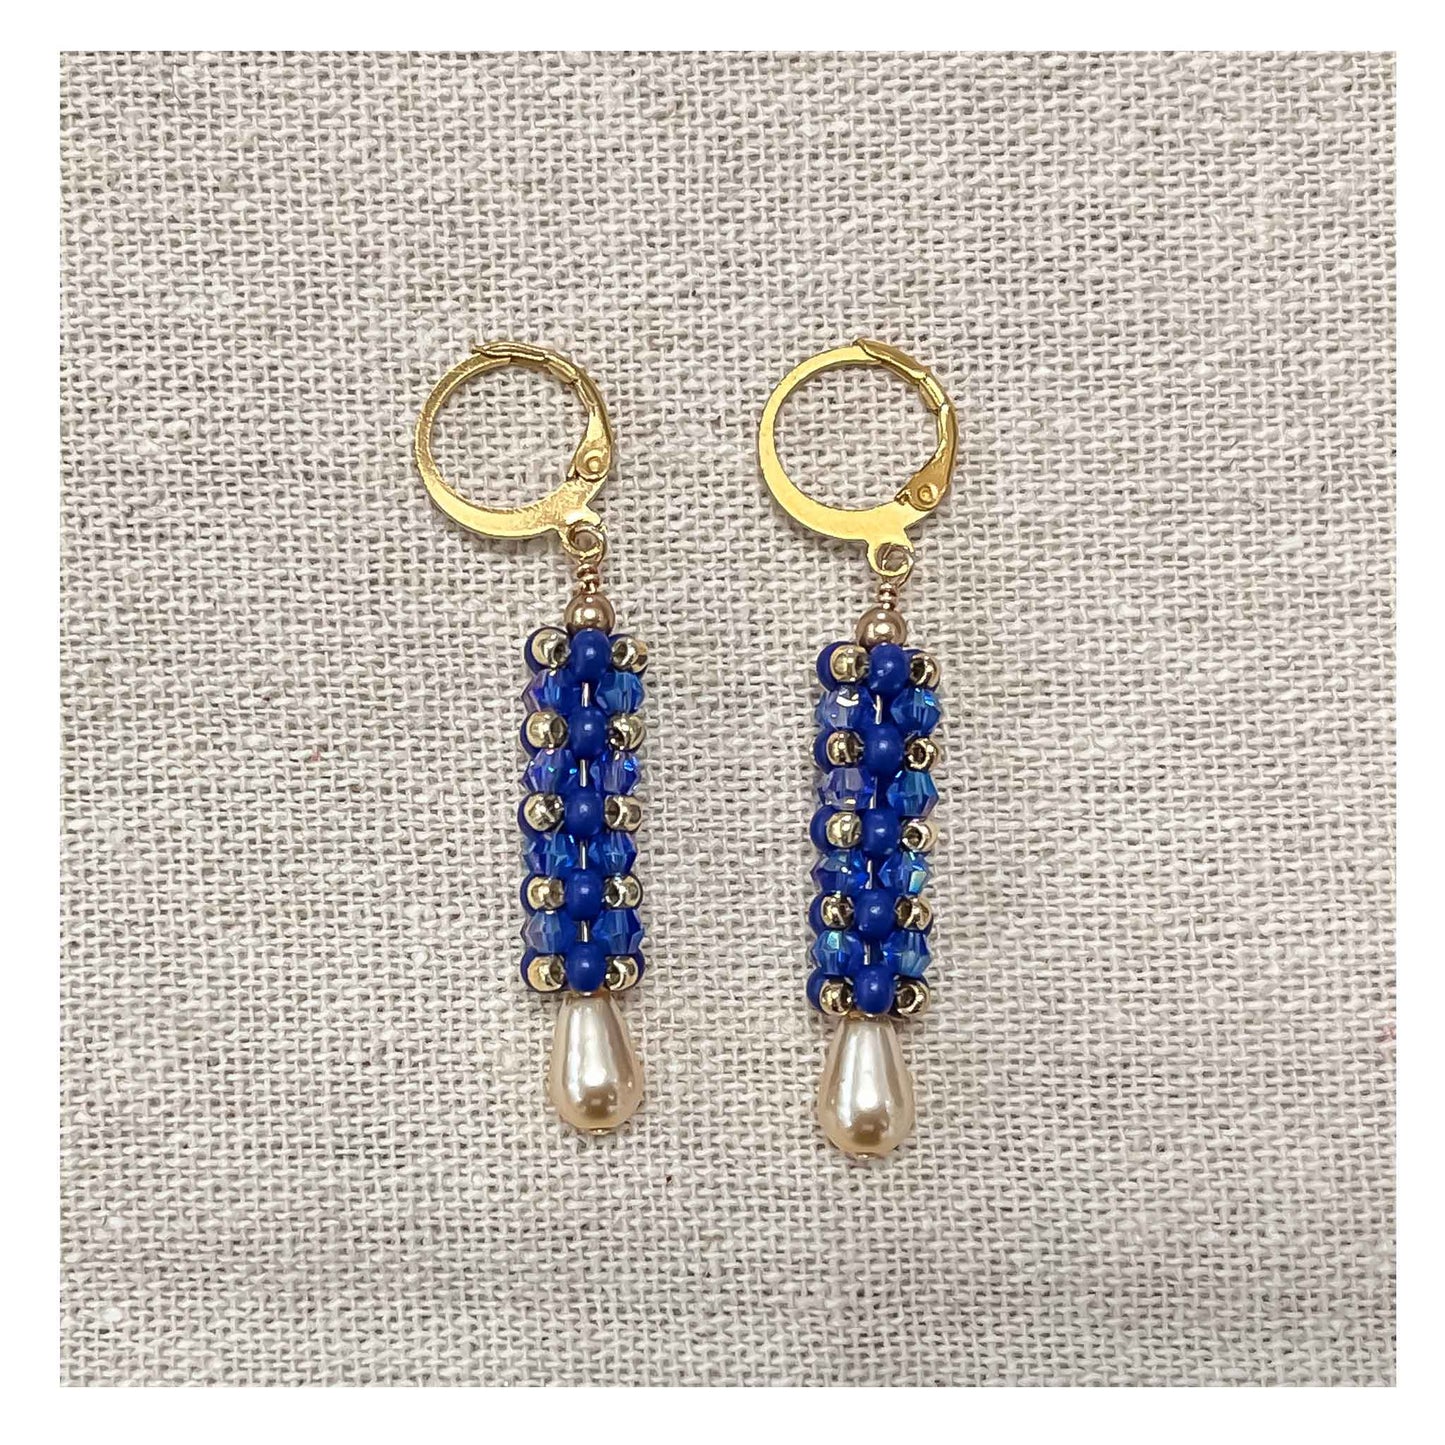 Beaded earrings, cubic right angle weave stitch,  Navy Blue with Swarovski crystals, gold filled, lever backs.